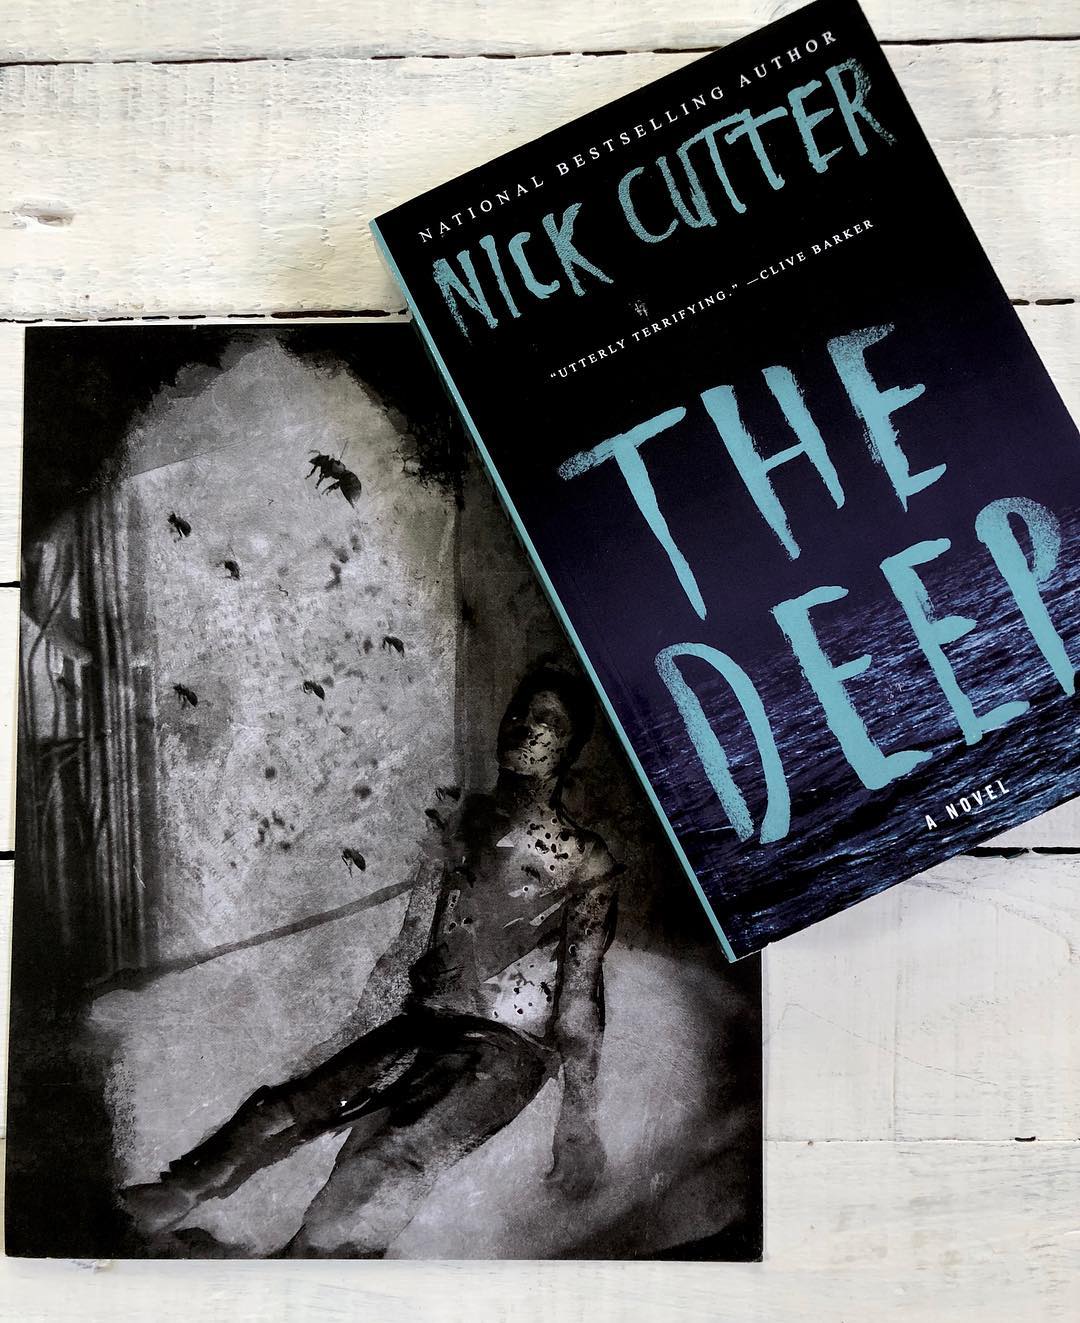 THE DEEP by Nick Cutter